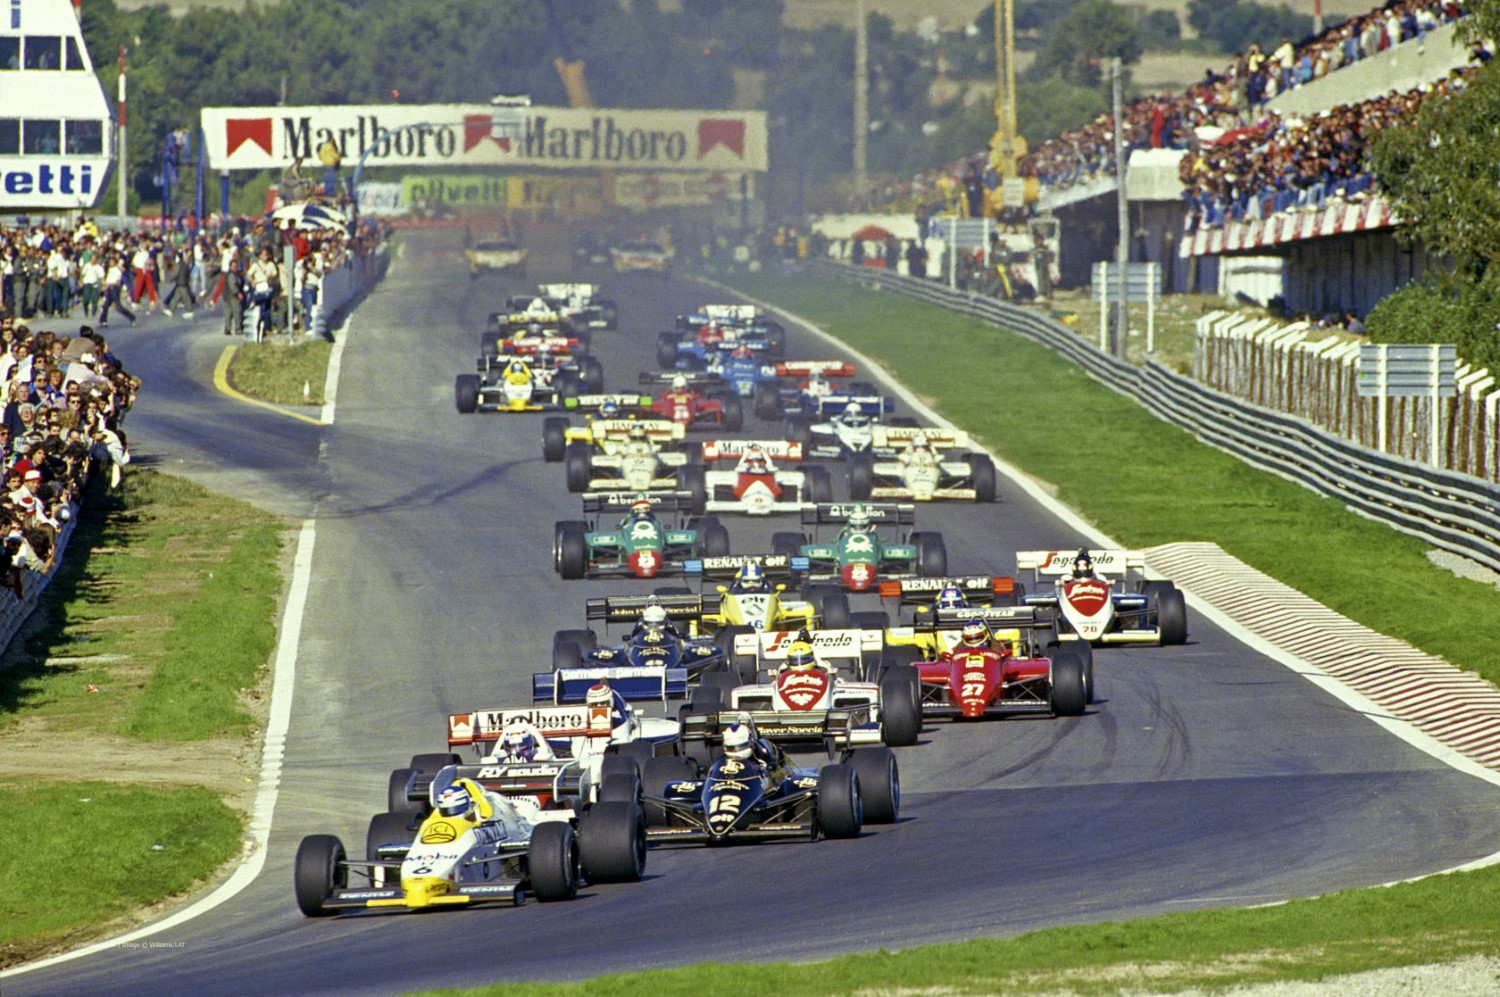 1984 start at Estoril. The last race at that track was in 1996